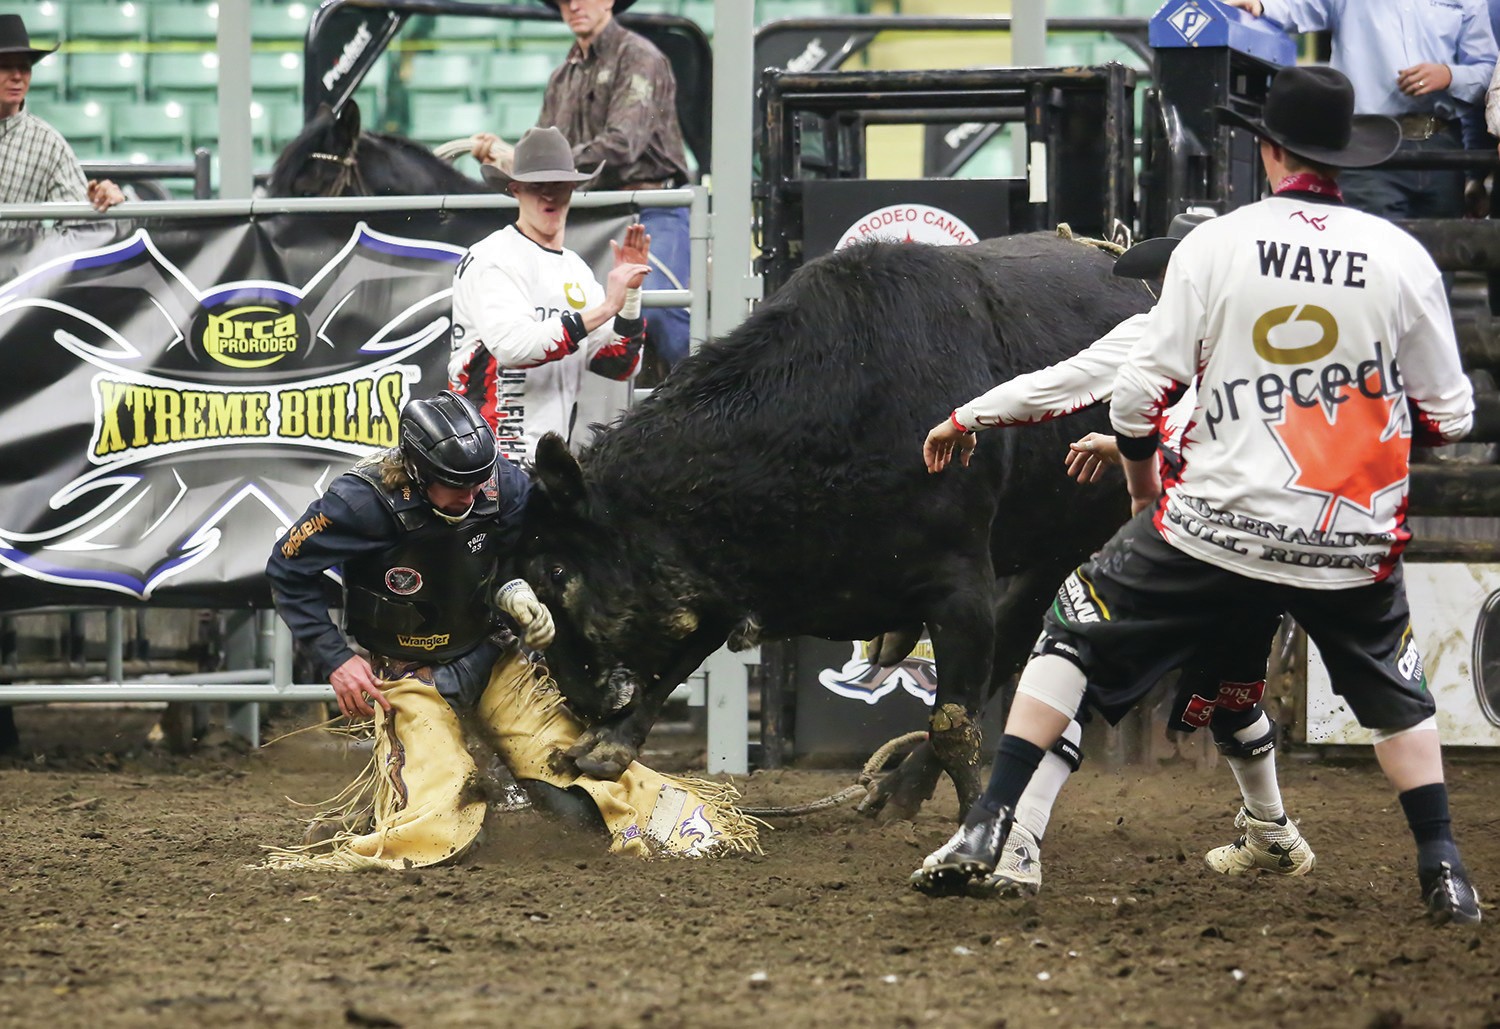 CLOSE CALL - Bull rider Ty Pankewitz got up close and personal with Crooked Nose from Wayne Vold Rodeo Co. during the Xtreme Bulls Event at the ENMAX Centrium on Saturday.